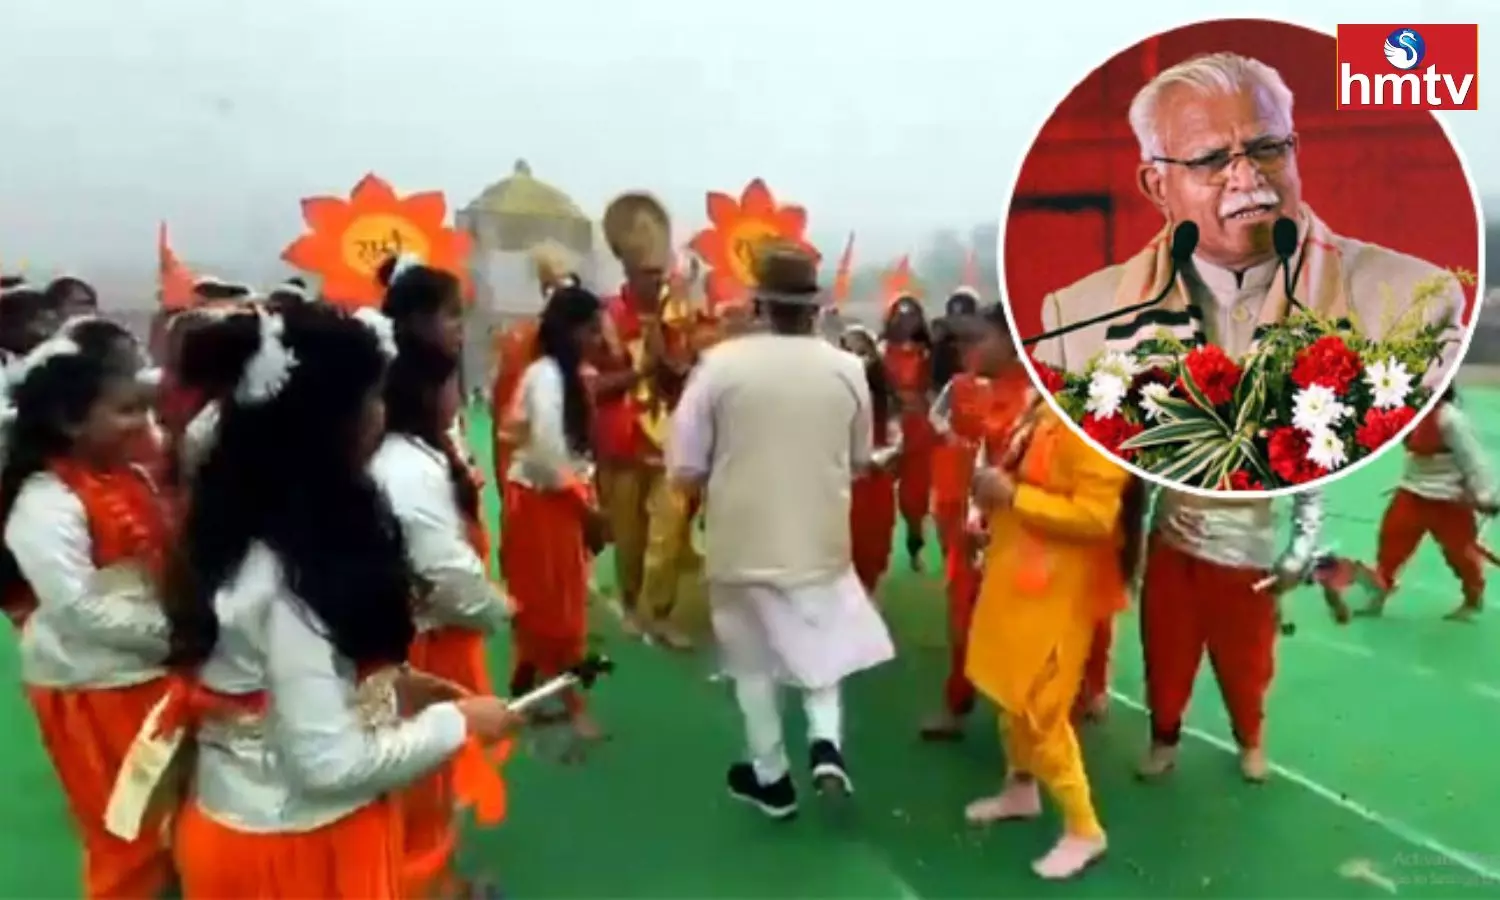 Haryana Chief Minister Touches Feet Of Child Actor Dressed As Lord Ram